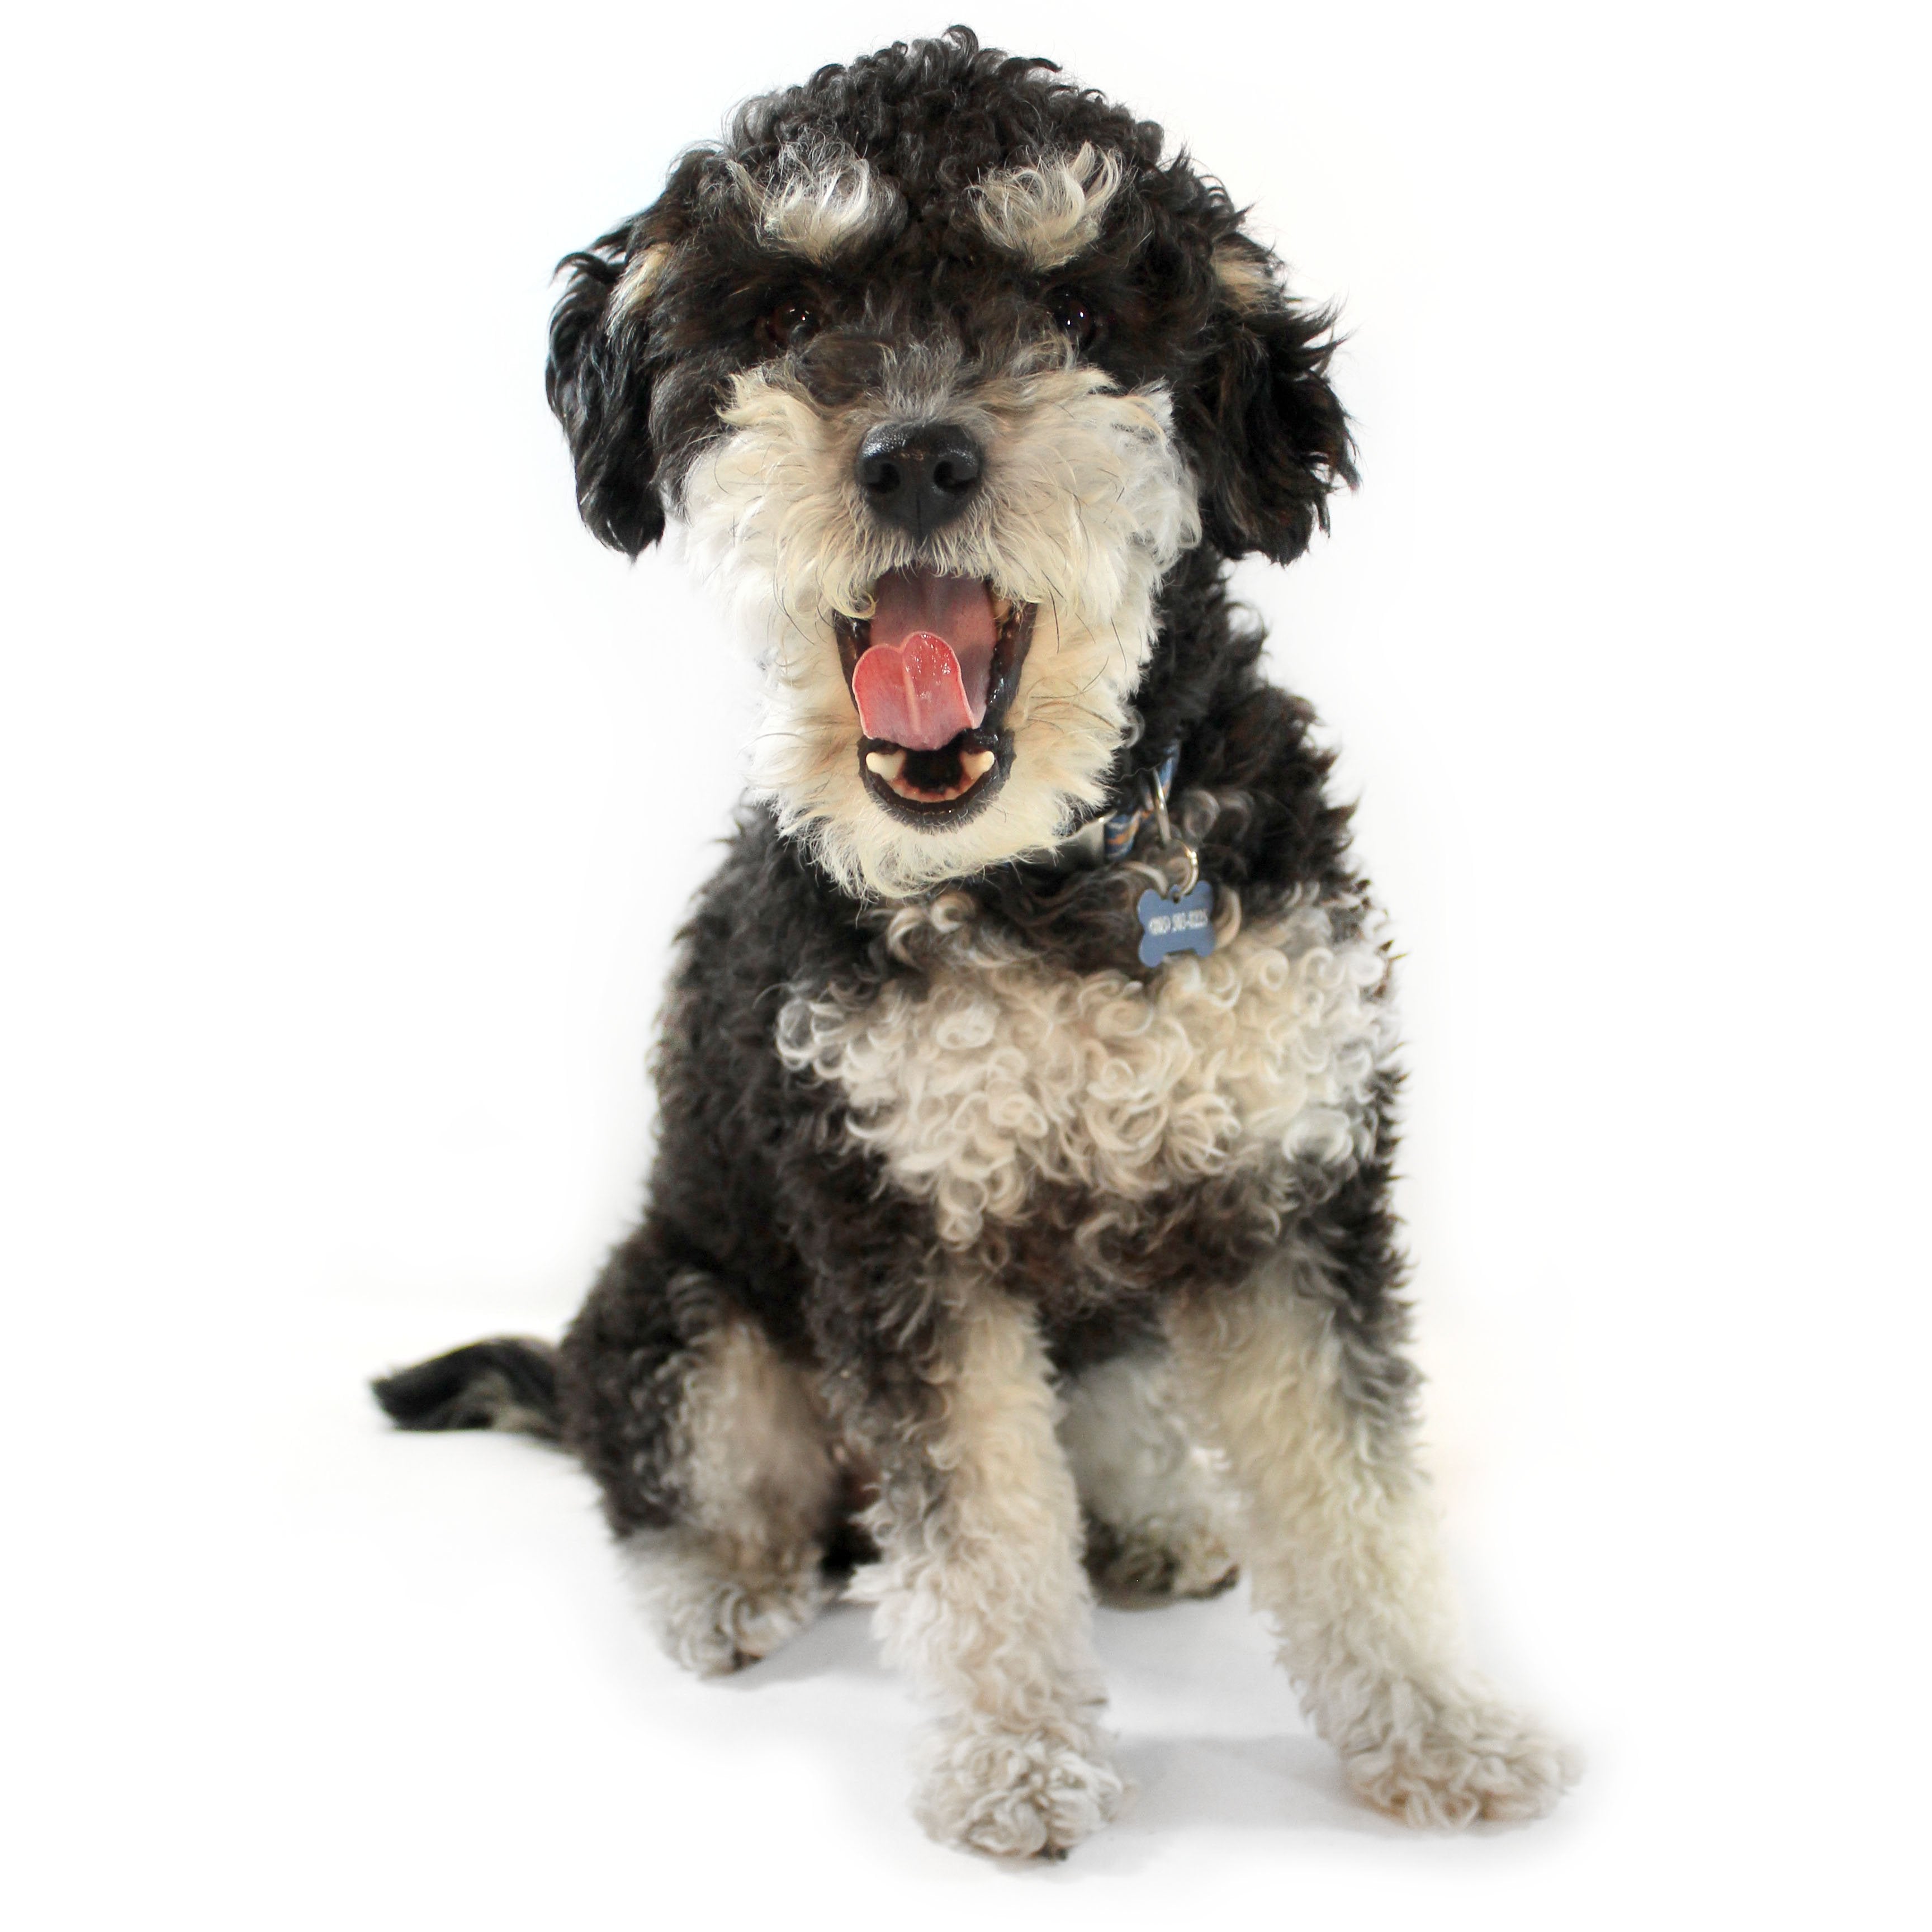  A curly-haired dog with black and white fur sitting down against a white background while yawning.